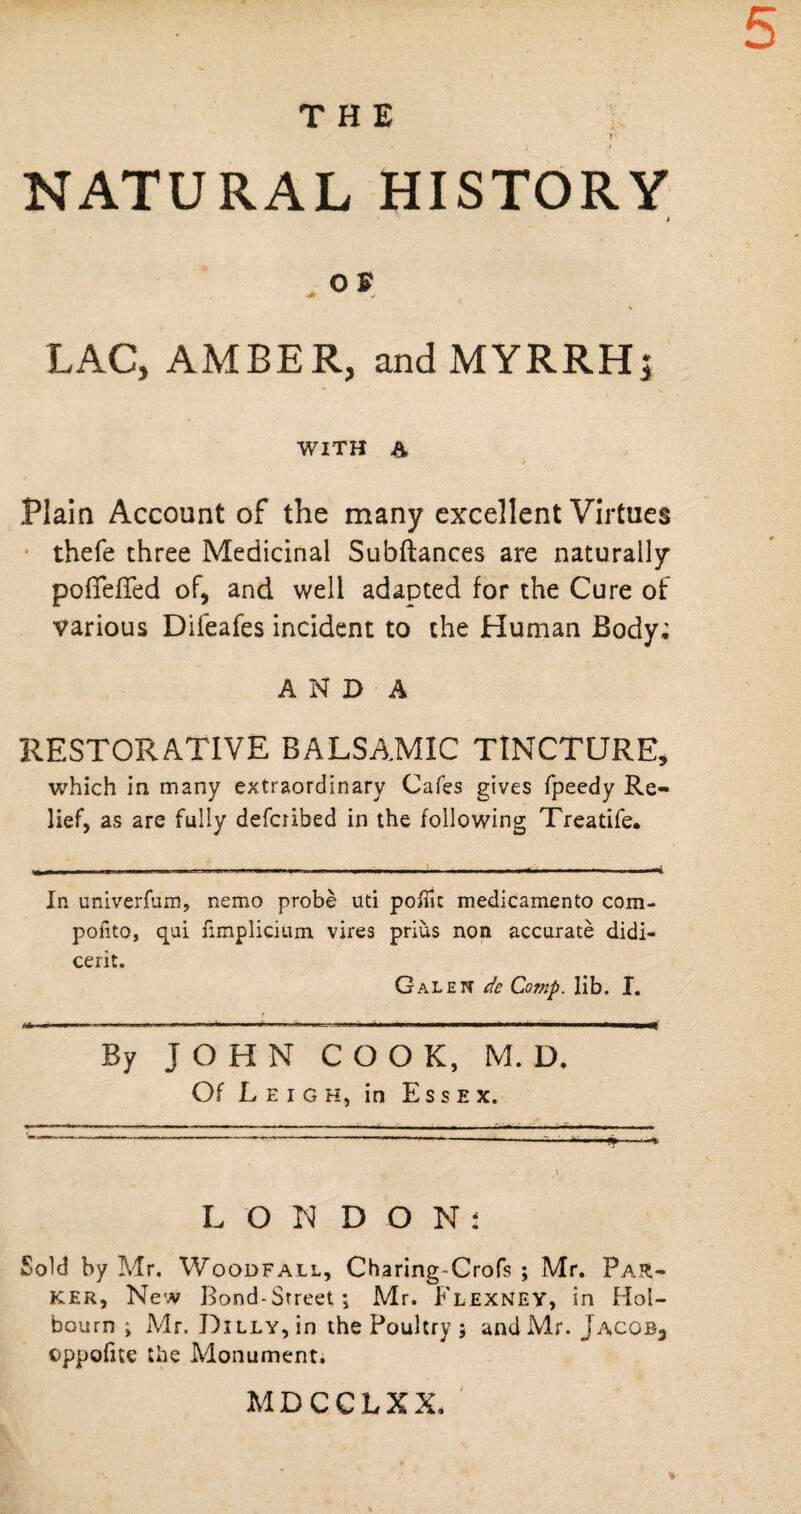 5 THE r- - j t NATURAL HISTORY i . OS LAC, AMBER, and MYRRH; WITH A t Plain Account of the many excellent Virtues thefe three Medicinal Subfiances are naturally poffeffed of, and well adapted for the Cure of various Difeafes incident to the Human Body; AN DA RESTORATIVE BALSAMIC TINCTURE, which in many extraordinary Cafes gives fpeedy Re¬ lief, as are fully defcrihed in the following Treatife. In univerfum, nemo probe uti poiTic medicamento com- pofito, qui fimplicium vires prius non accurate didi- cerit. Galen de Comp. lib. I. J O H N COOK, M. D, Of Leigh, in Essex. LON DON: Sold by Mr, Woodfall, Charing-Crofs ; Mr. Par¬ ker, New Bond-Street; Mr. Flexney, in Hol- bourn ; Mr. Dilly, in the Poultry ; and Mr. Jacob, oppofue the Monument. MDCCLXX.